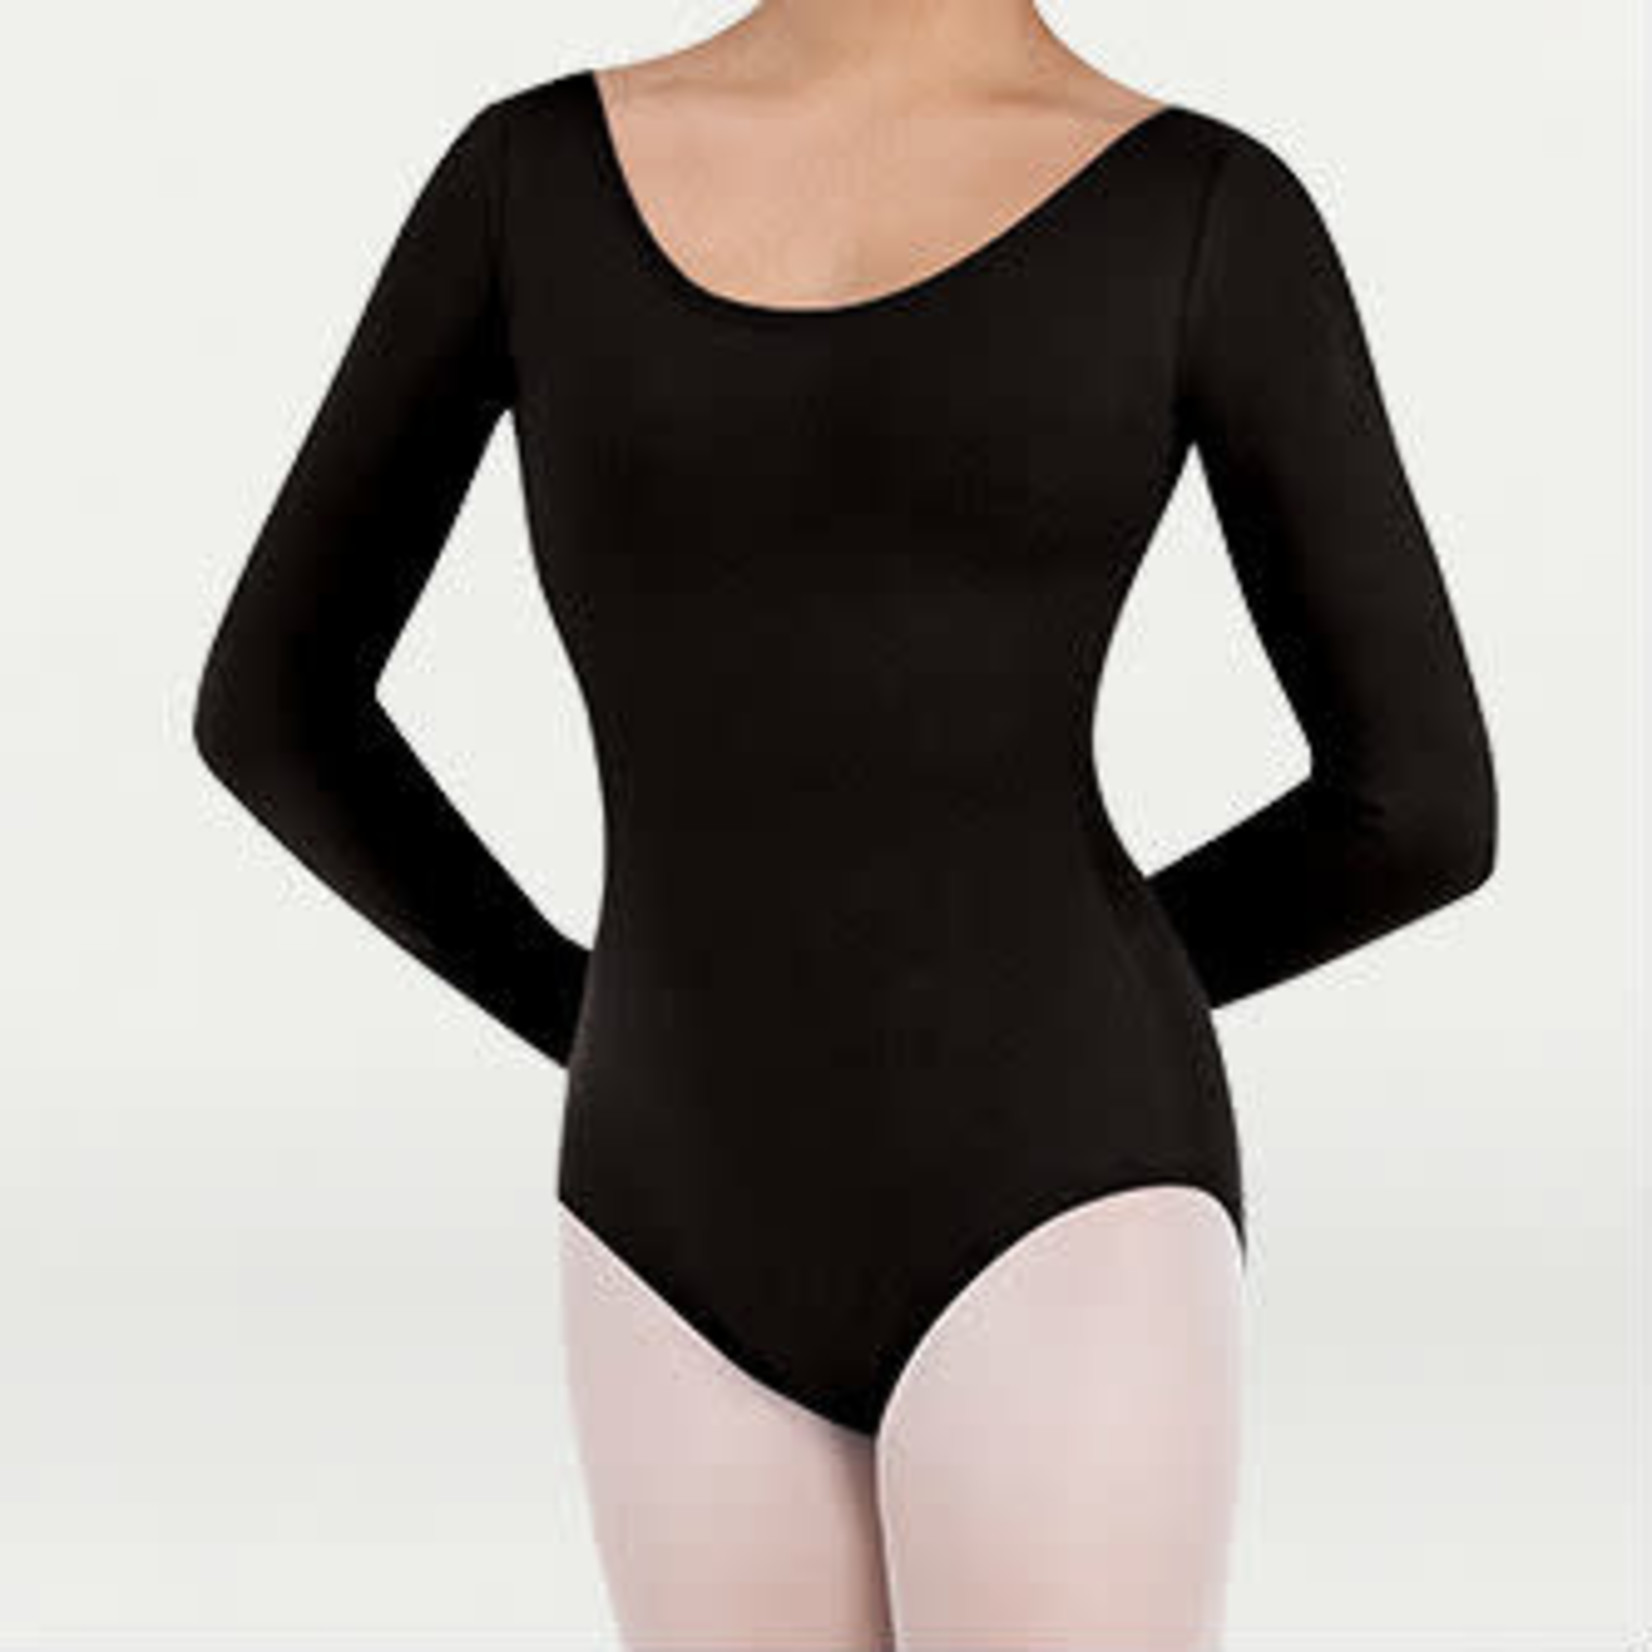 Body Wrappers Body Wrappers BWP226 Womens Long Sleeve Leotard